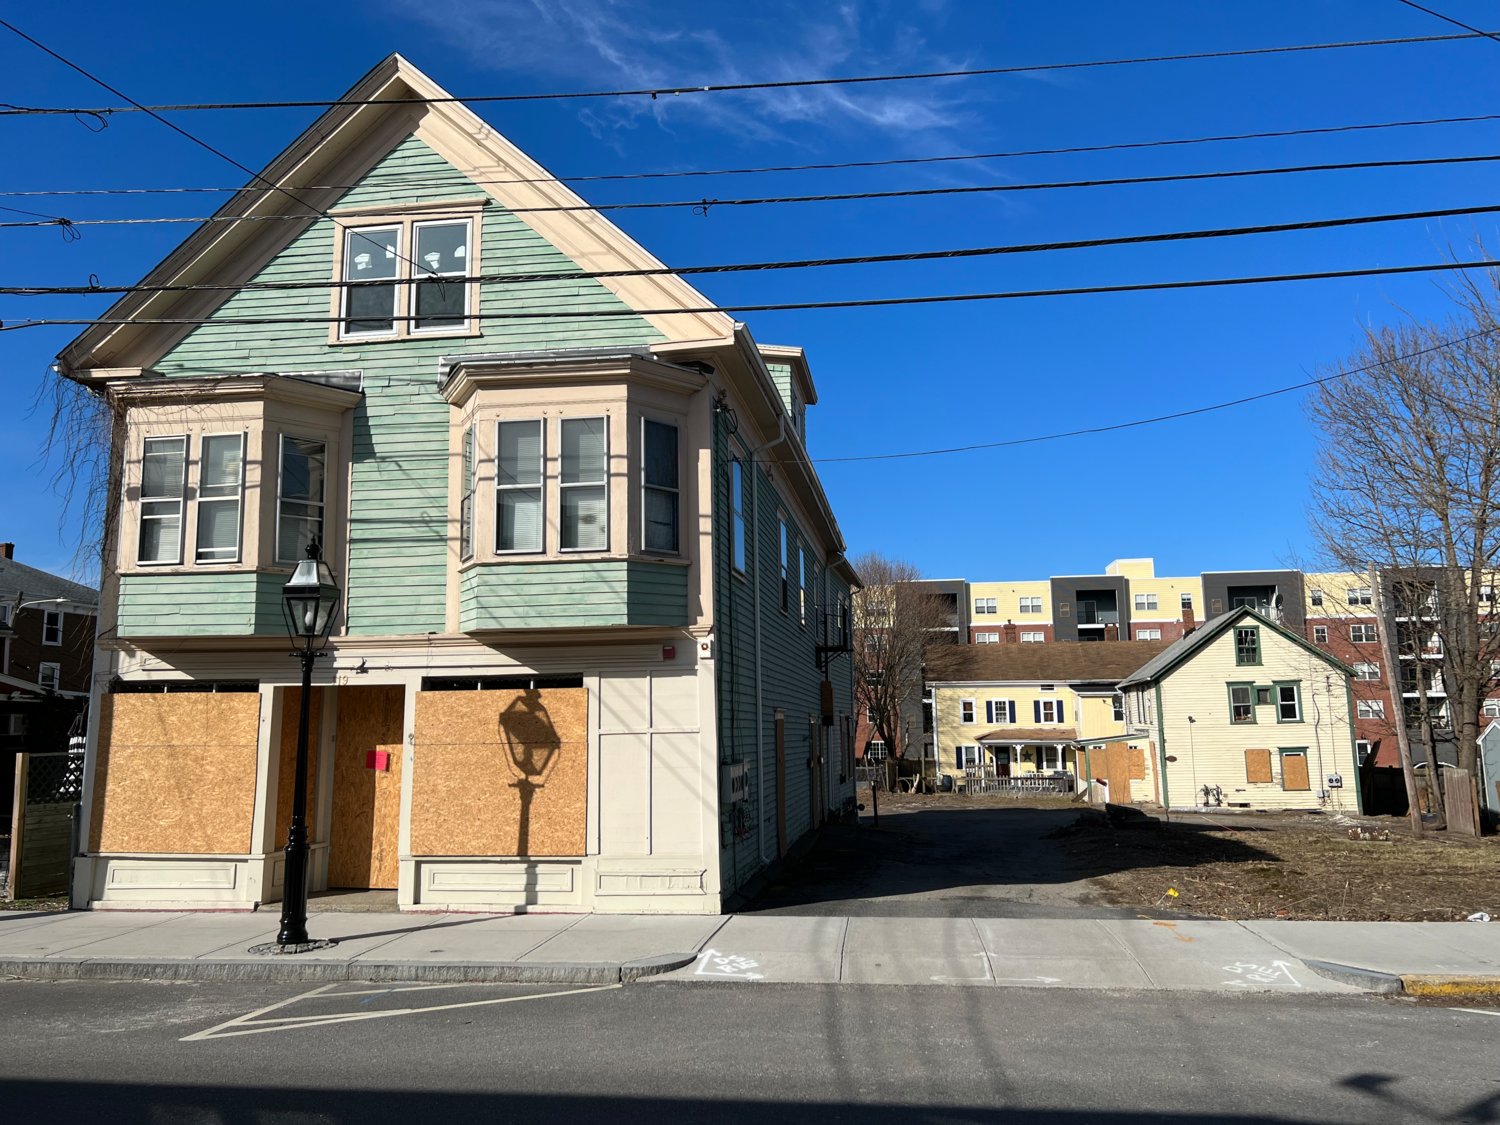 The development that was recently denied at 119 Water St. in Warren might have fared differently under some of the legislation proposed in the 14-bill package brought forth by Speaker K. Joseph Shekarchi earlier this month.